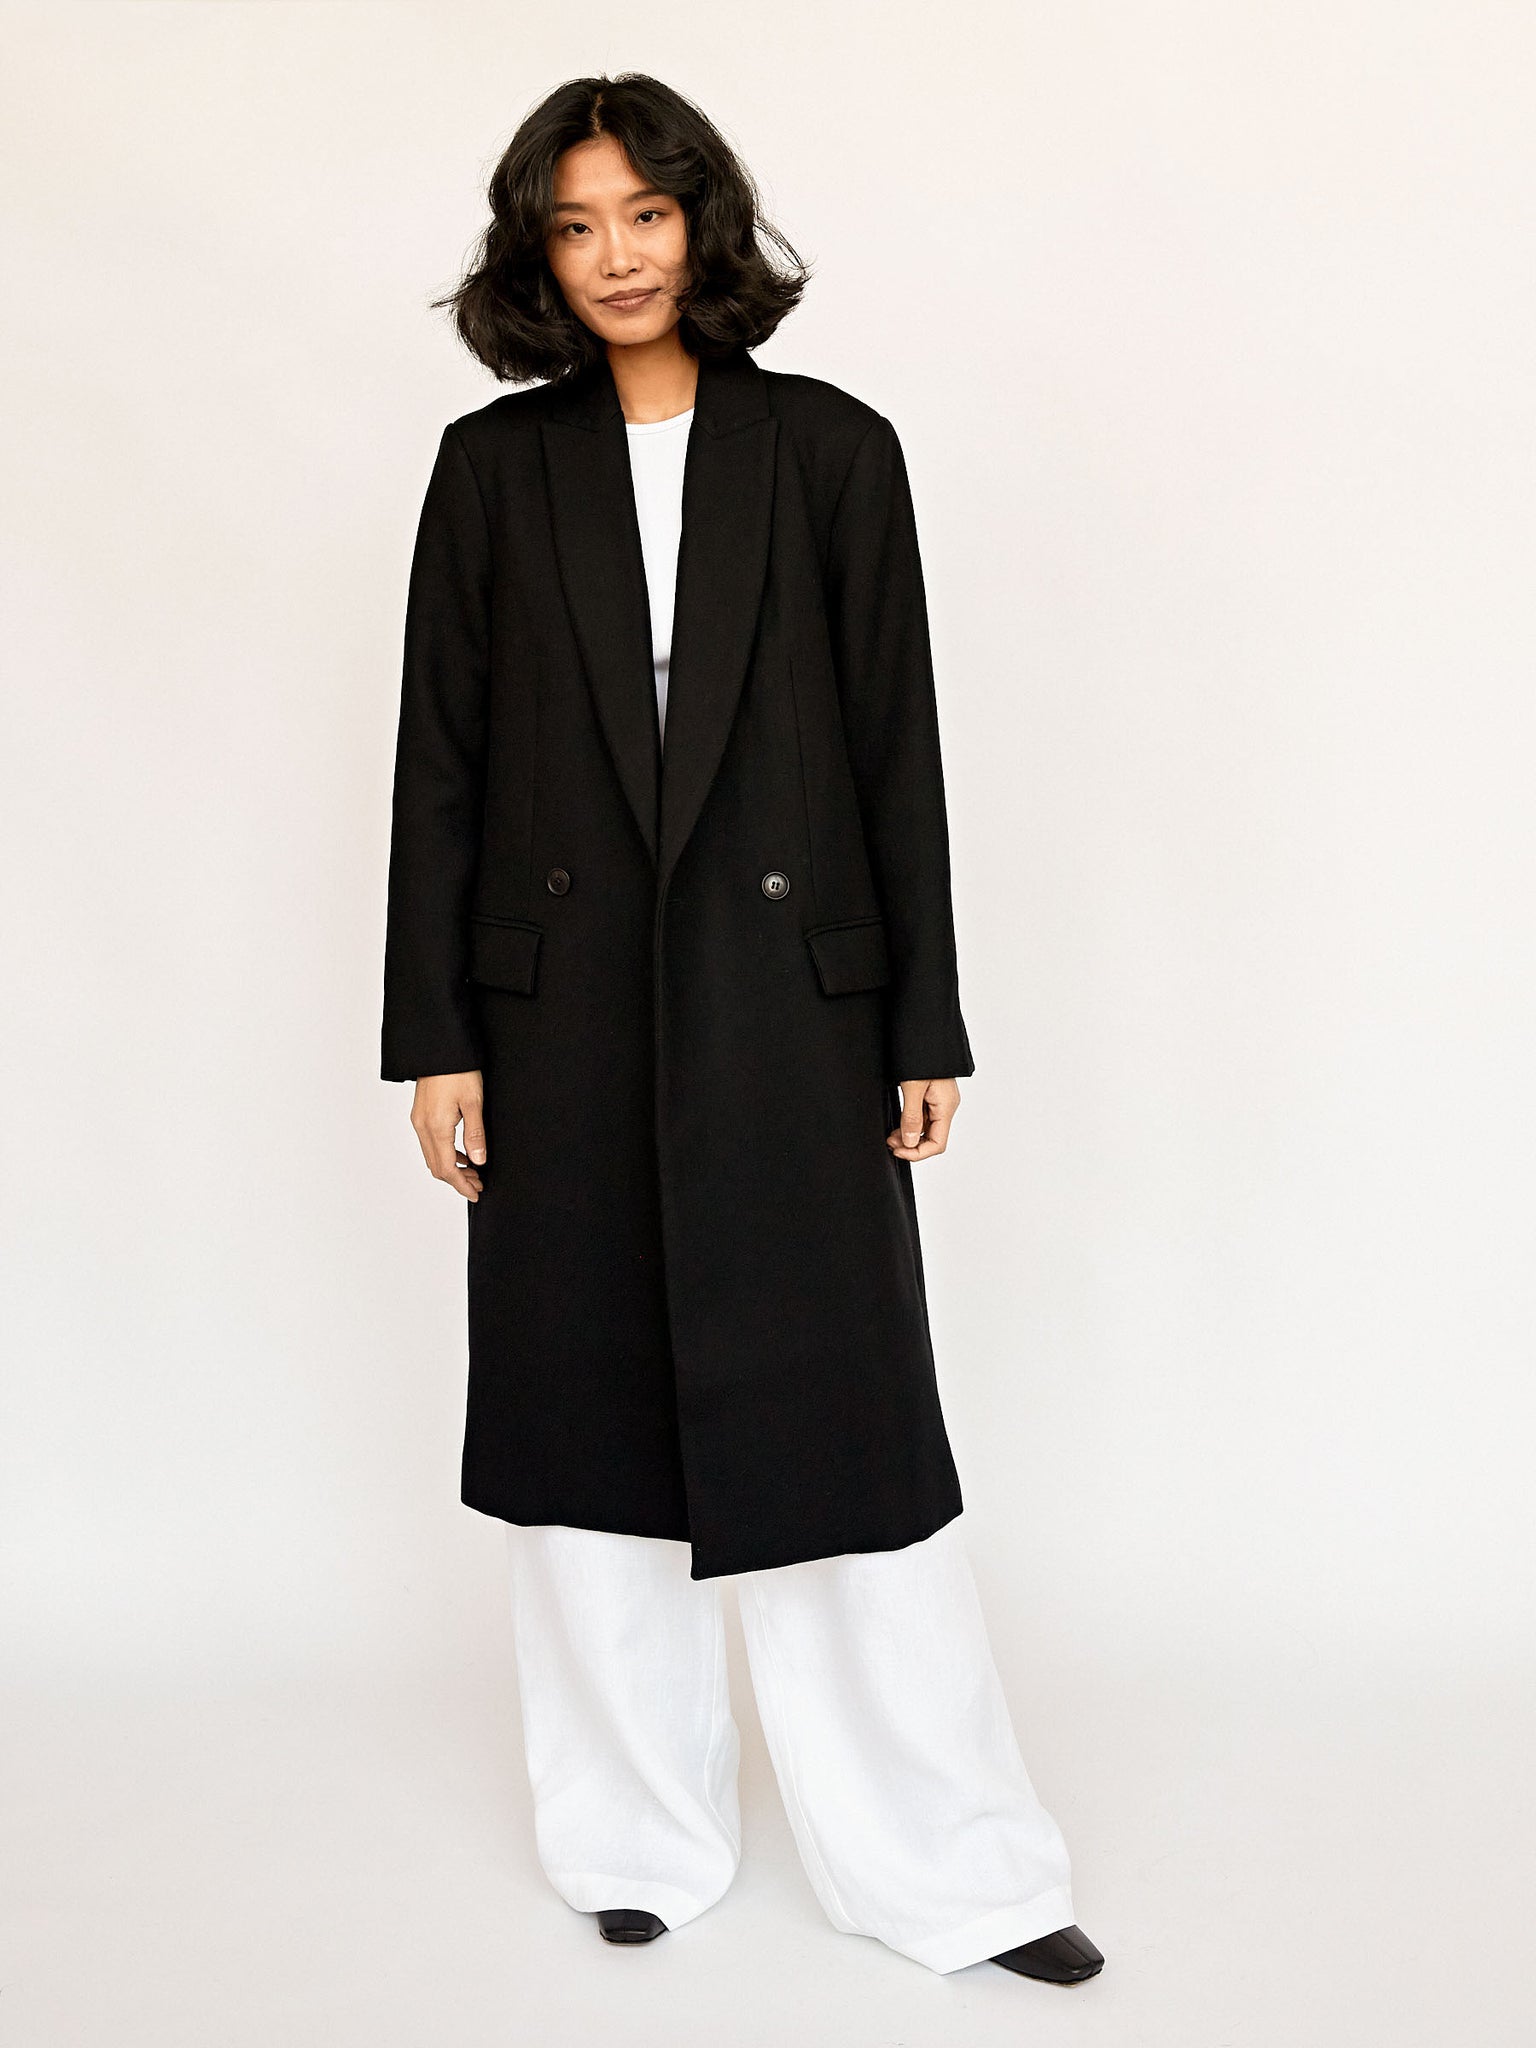 St. Agni | Black Double Breasted Wool Coat | The UNDONE by St. Agni